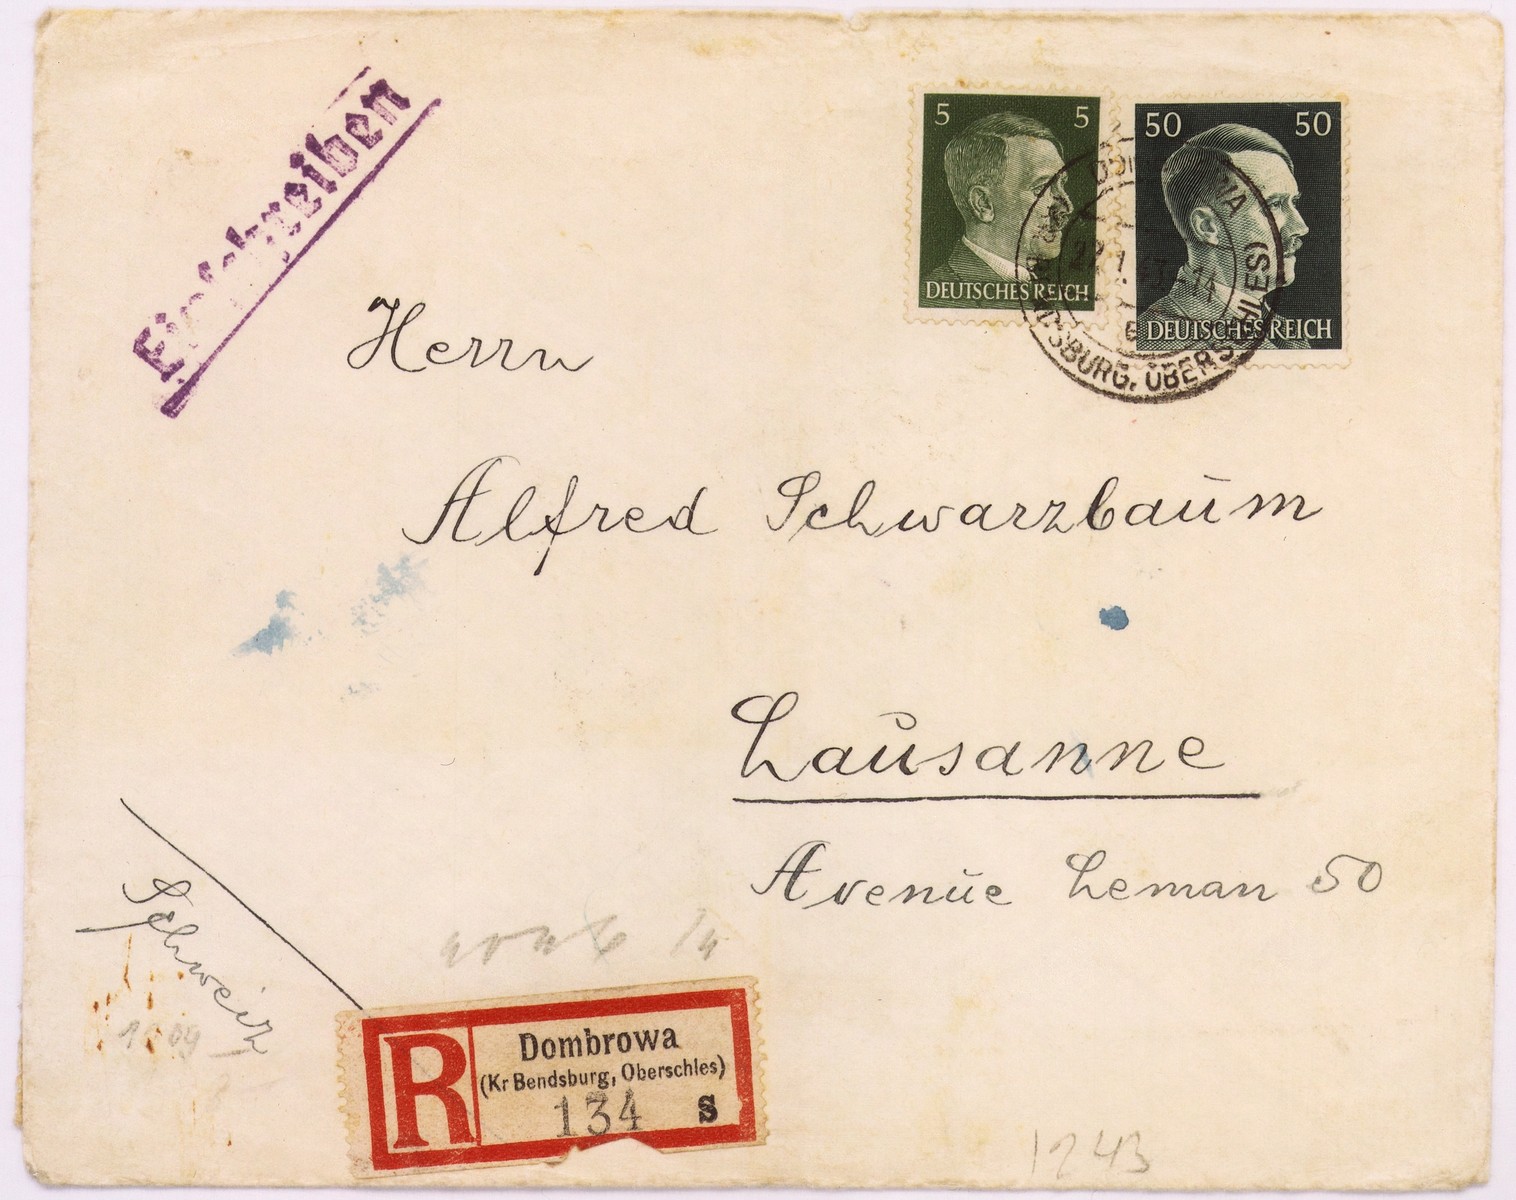 An envelope of a registered letter sent from  Dabrowa  by I. Fajerman to Alfred Schwartzbaum in Lausanne, Switzerland.  The return address of the sender or senders states:  Bendsburg, Langer Weg.  On the back of the envelope there is a piece of tape with a stamp of the German censor.